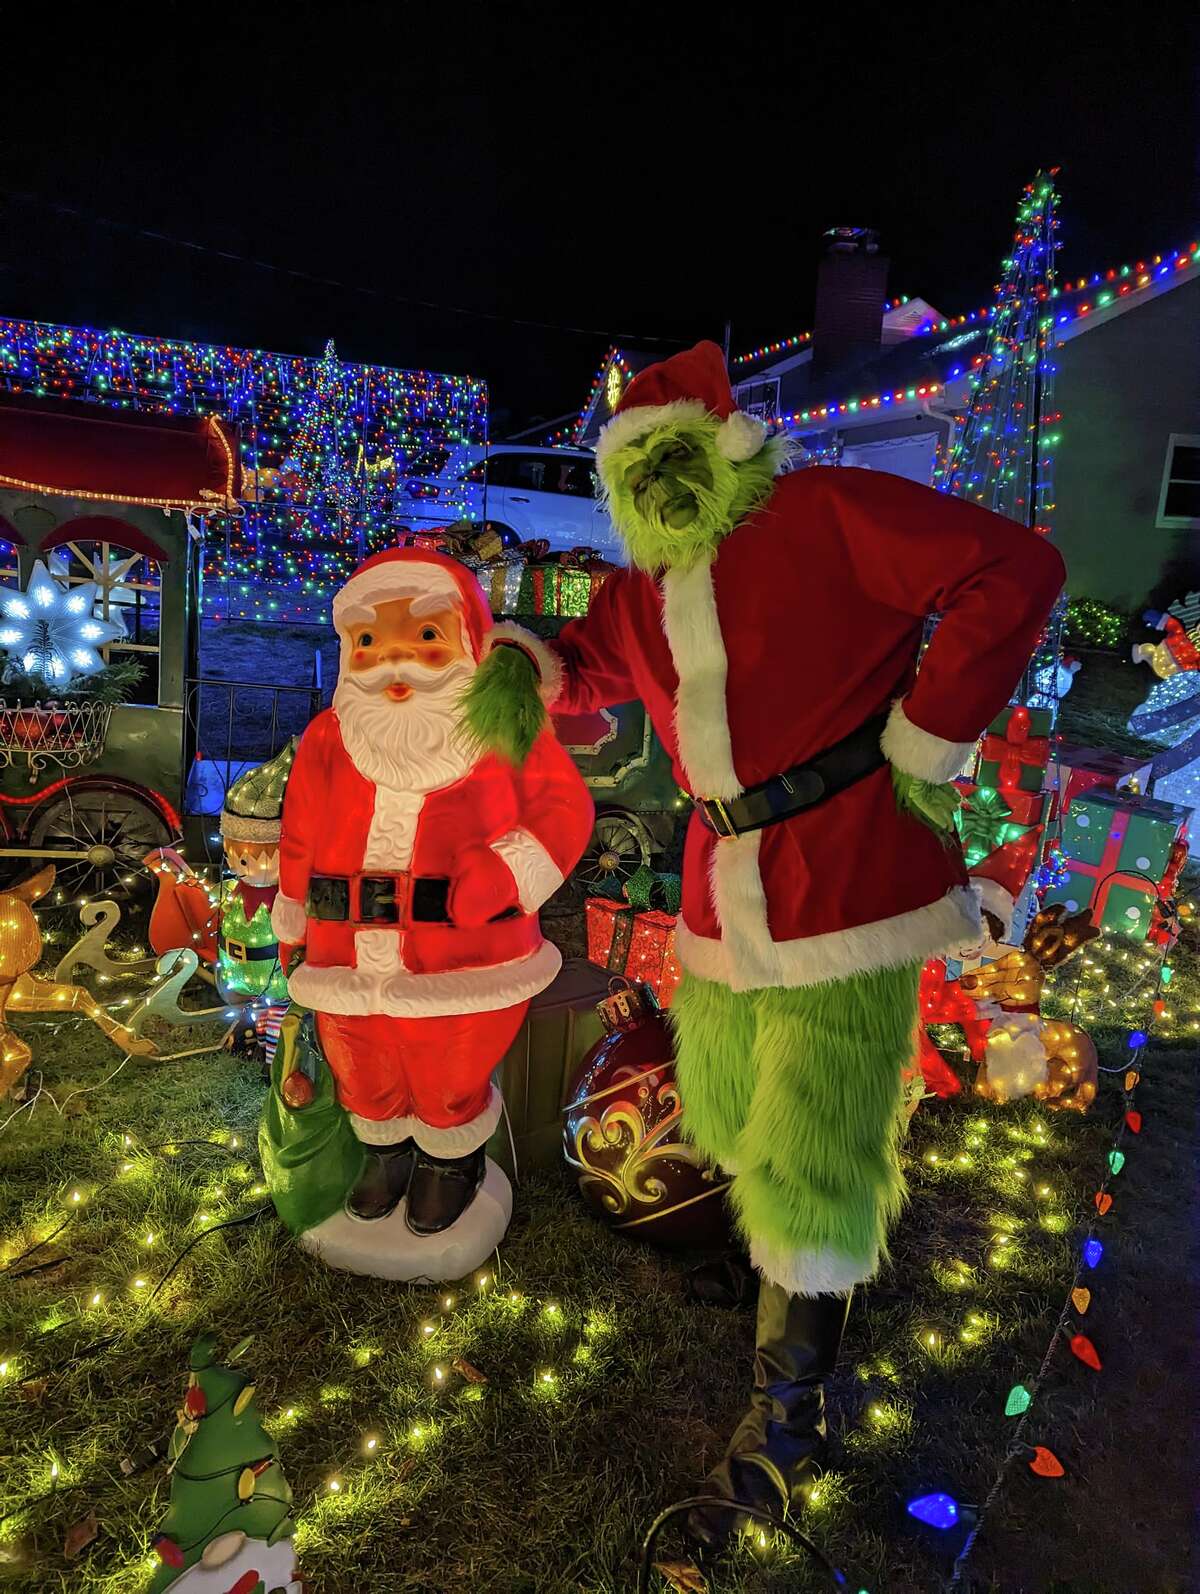 Santa and the Grinch at the main fundraising display for the Sterling Road/Santa's Runway light display in Trumbull. 